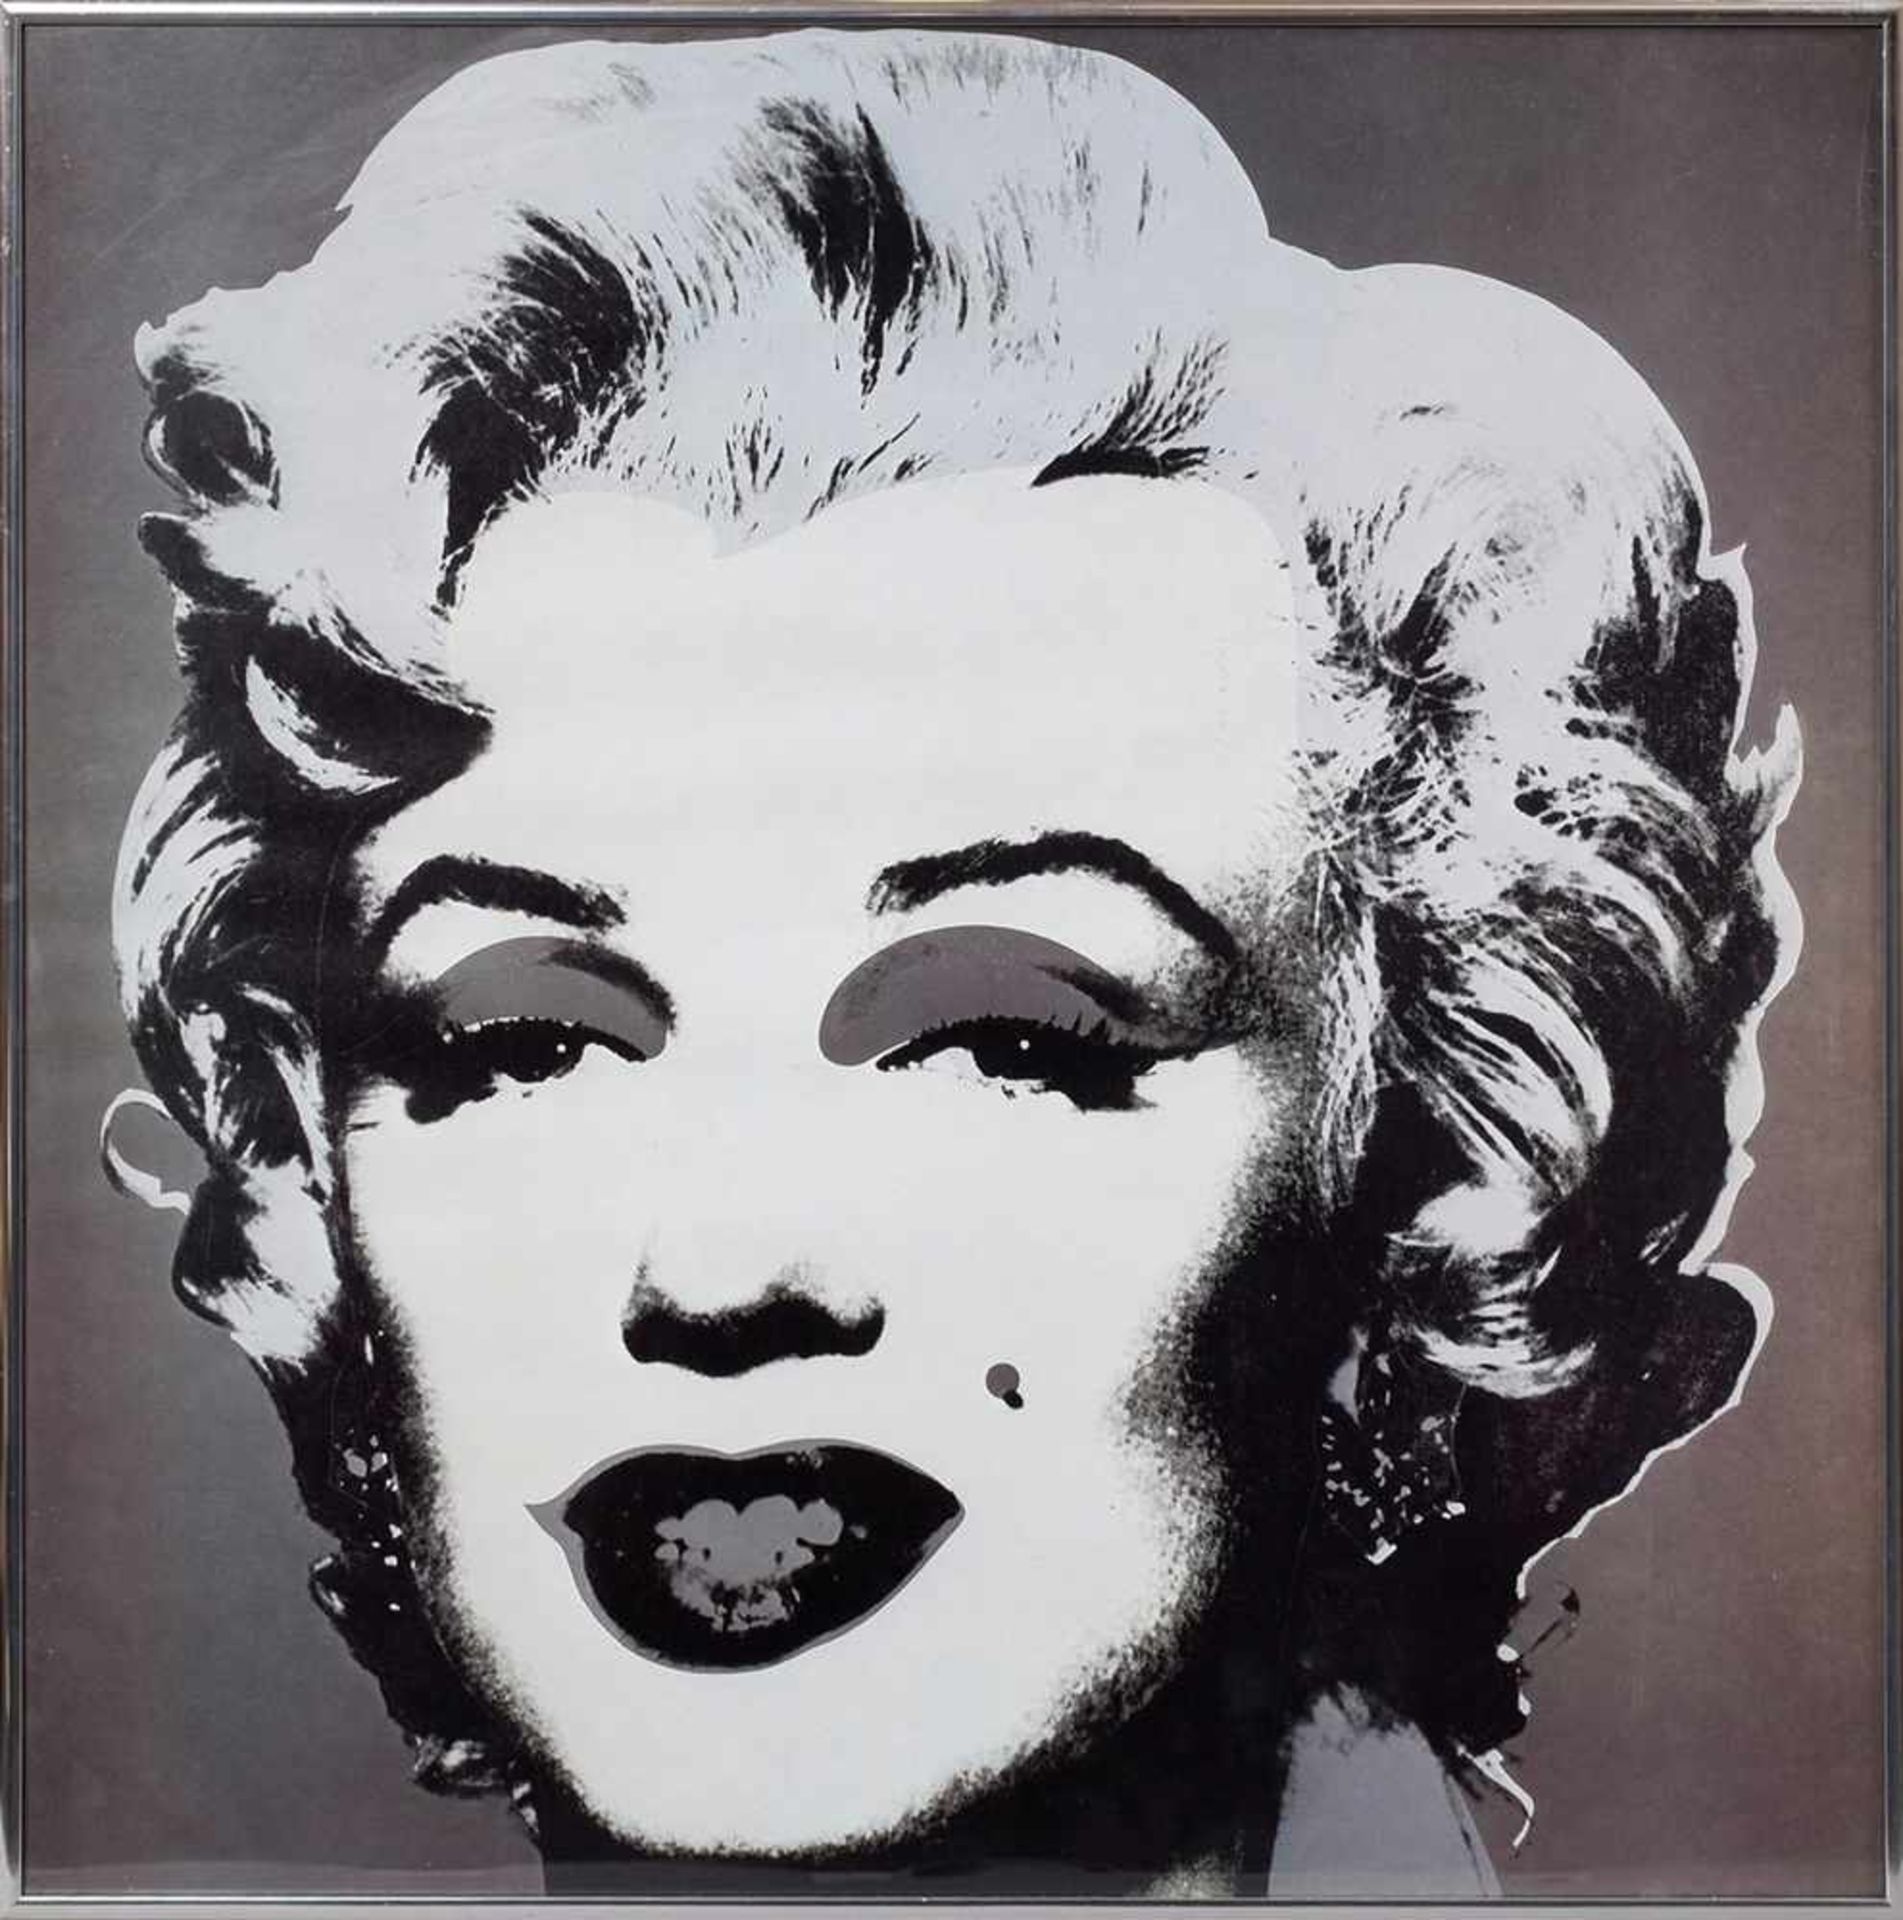 2 Diverse Warhol, Andy (1928-1987) "Turquoise Marilyn" Offsetlithographie Poster der Tate Gallery - Image 3 of 5